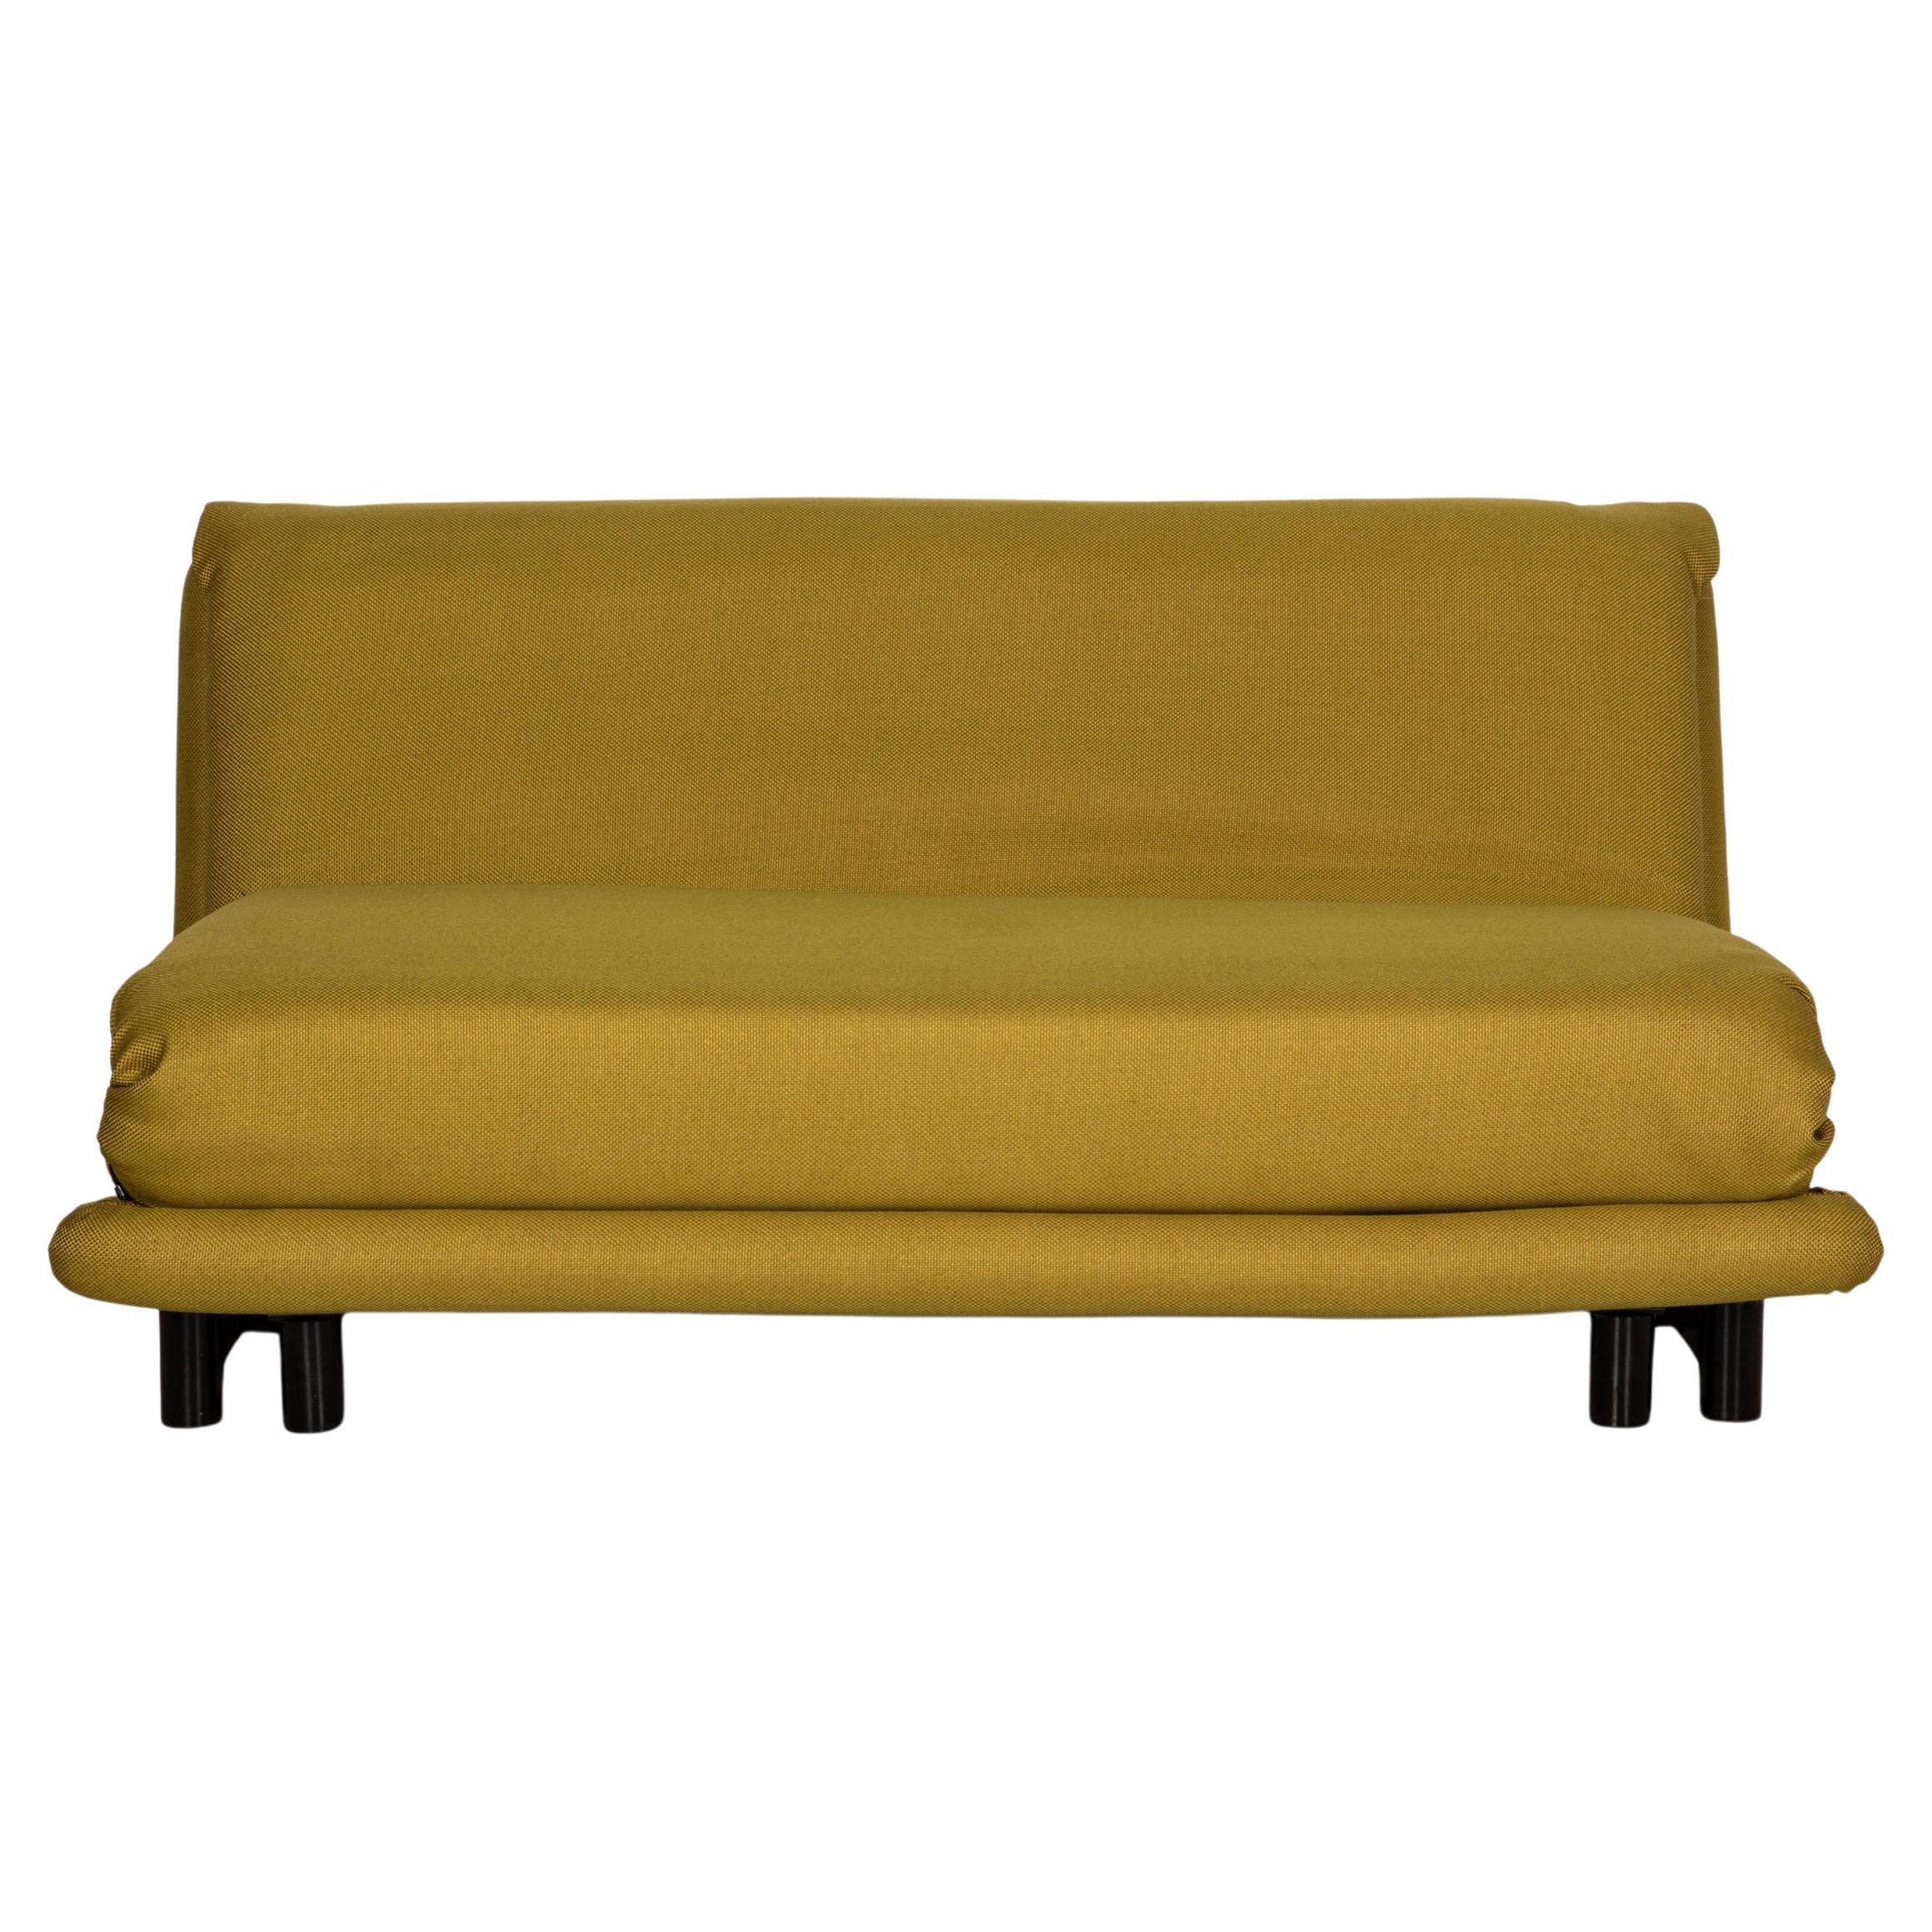 Ligne Roset Multy Fabric Sofa Yellow Three-Seater Couch Function Sleeping For Sale